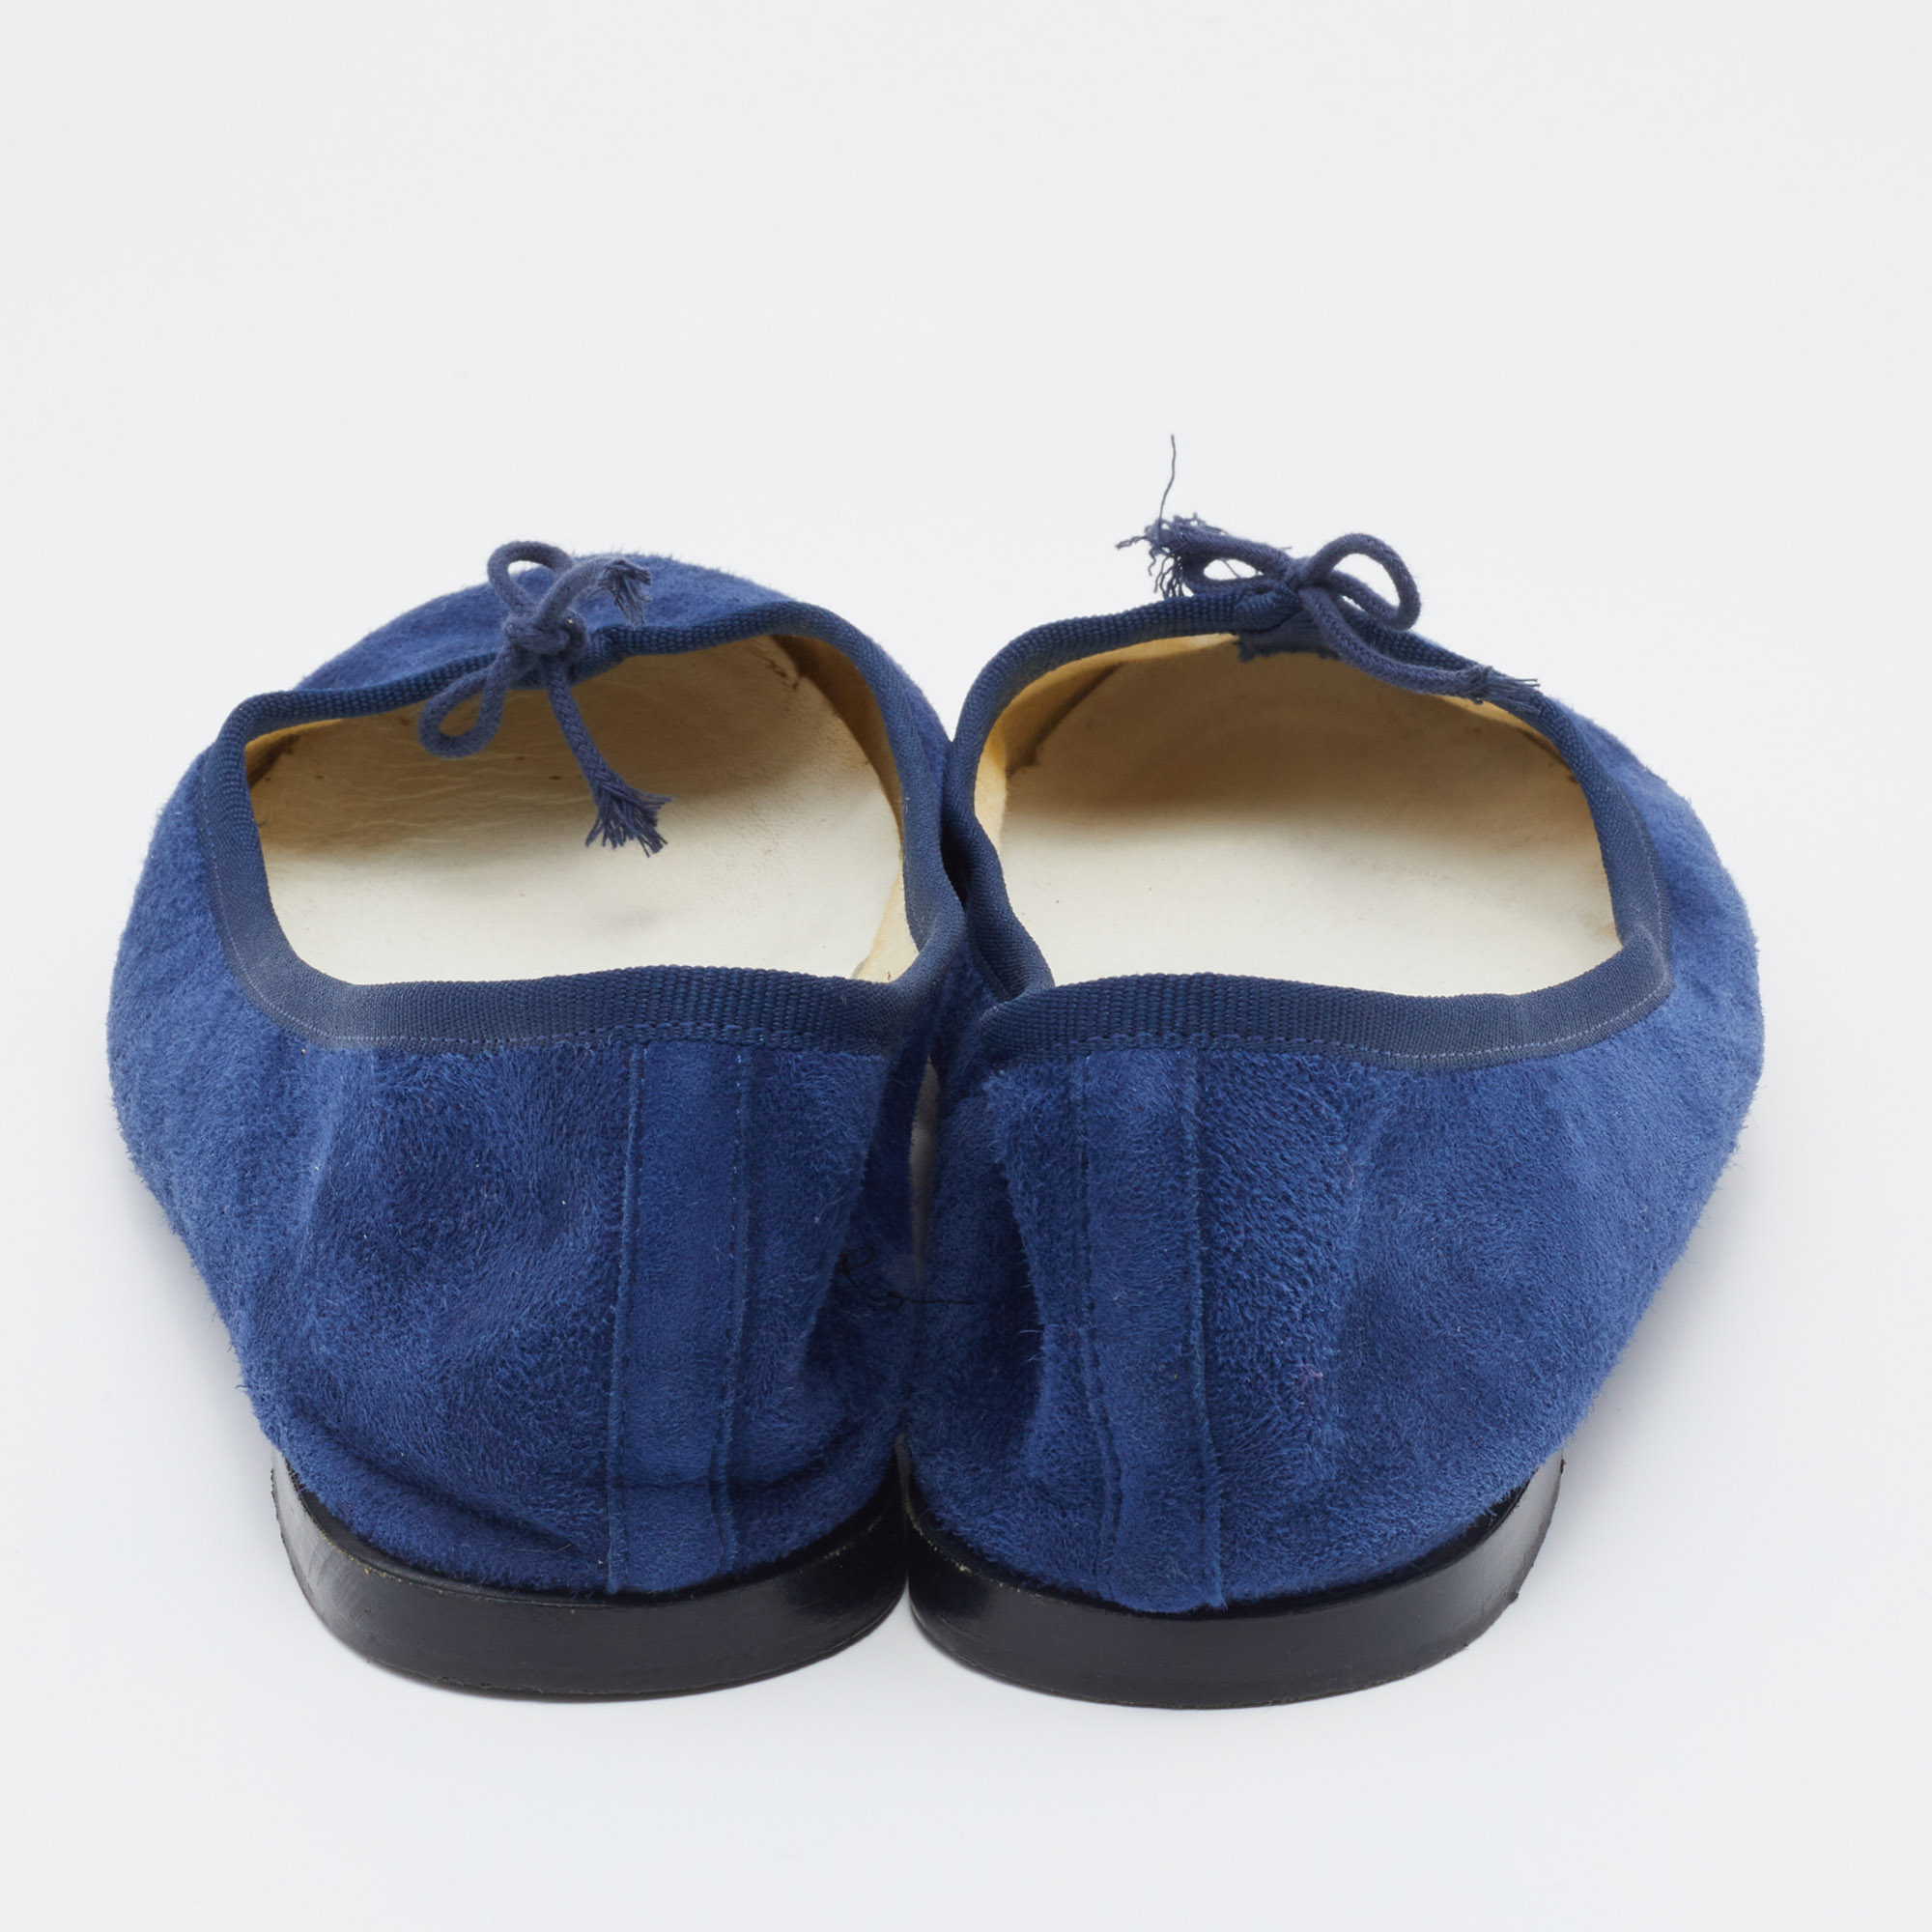 Repetto Navy Blue Suede Bow Ballet Flats Size 41